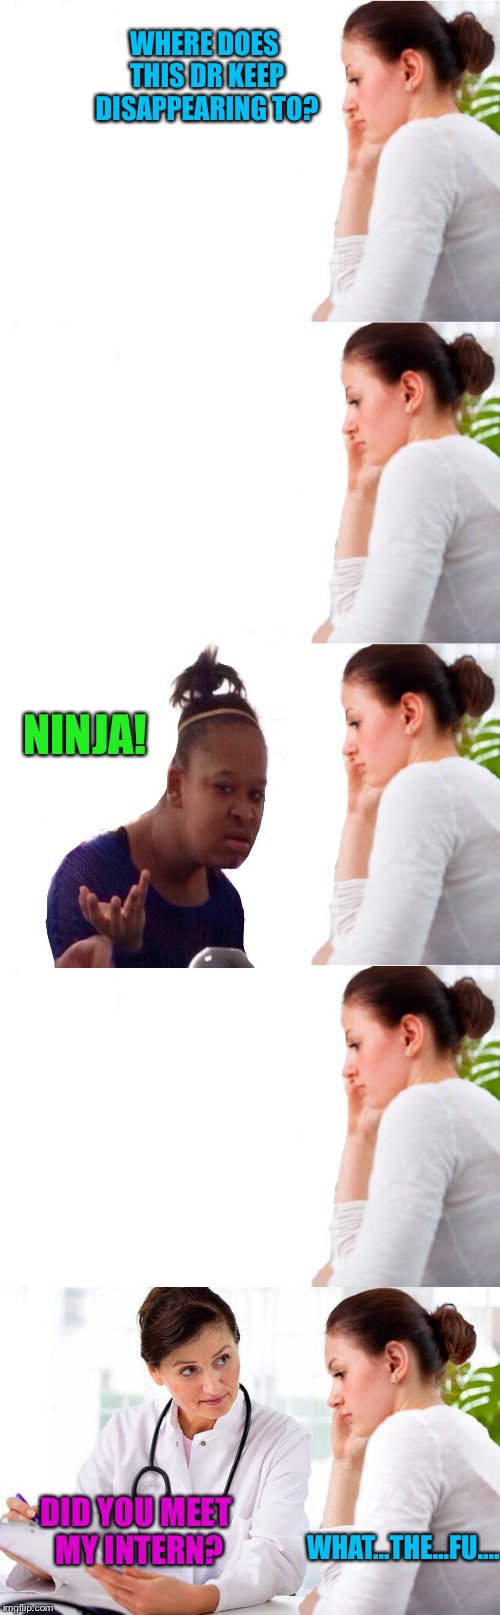 NINJA! DID YOU MEET MY INTERN? WHAT...THE...FU.... WHERE DOES THIS DR KEEP DISAPPEARING TO? | made w/ Imgflip meme maker